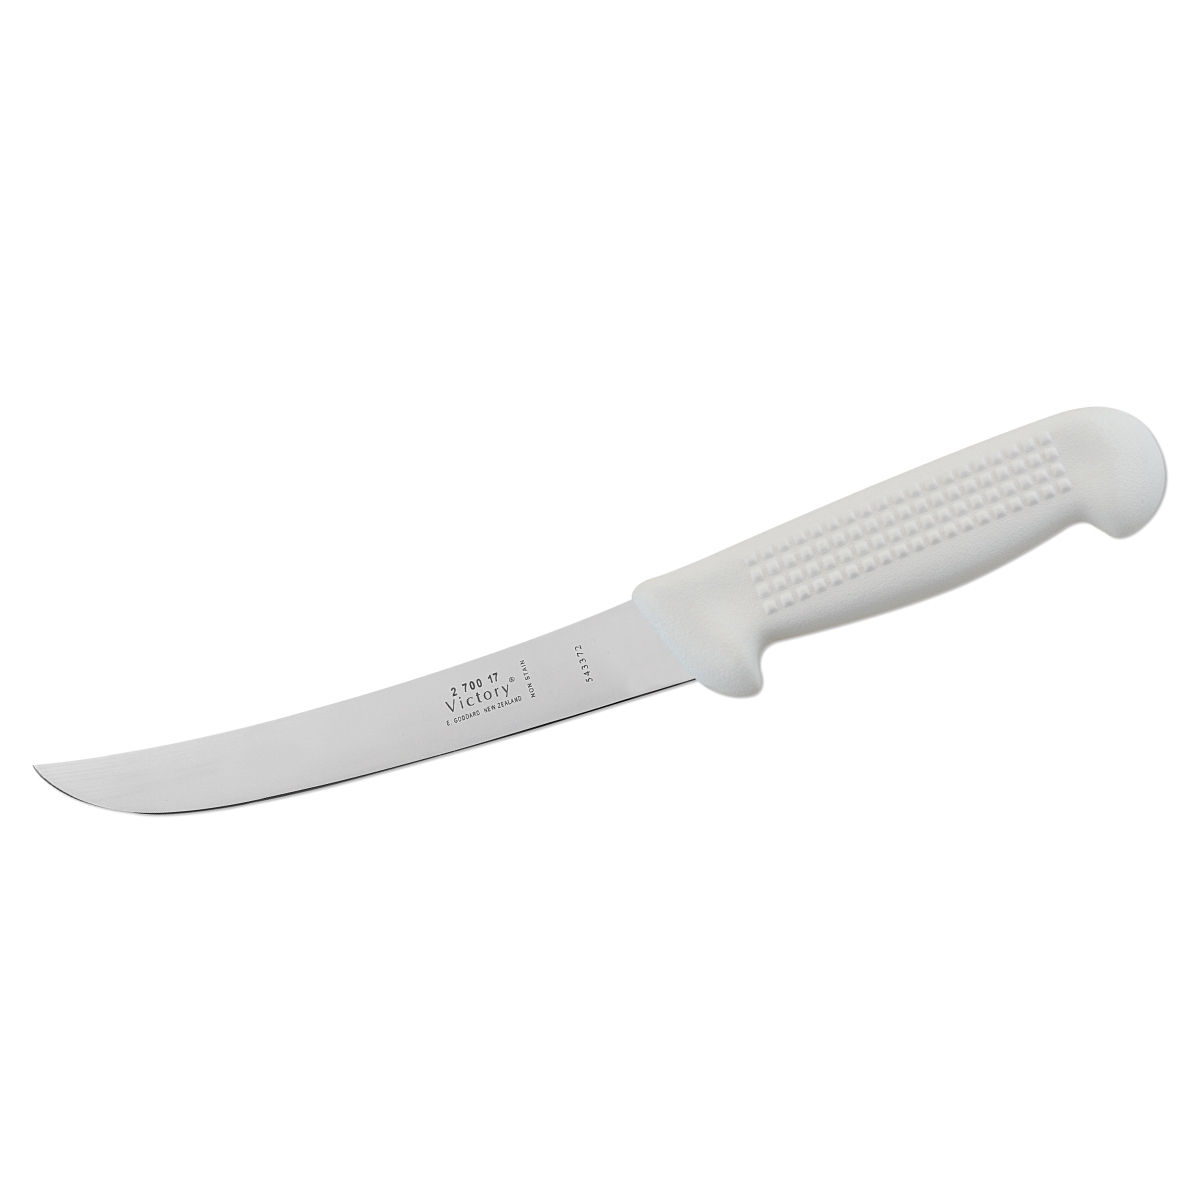 Victory Boning Knife, 17cm (7) - Curved - White